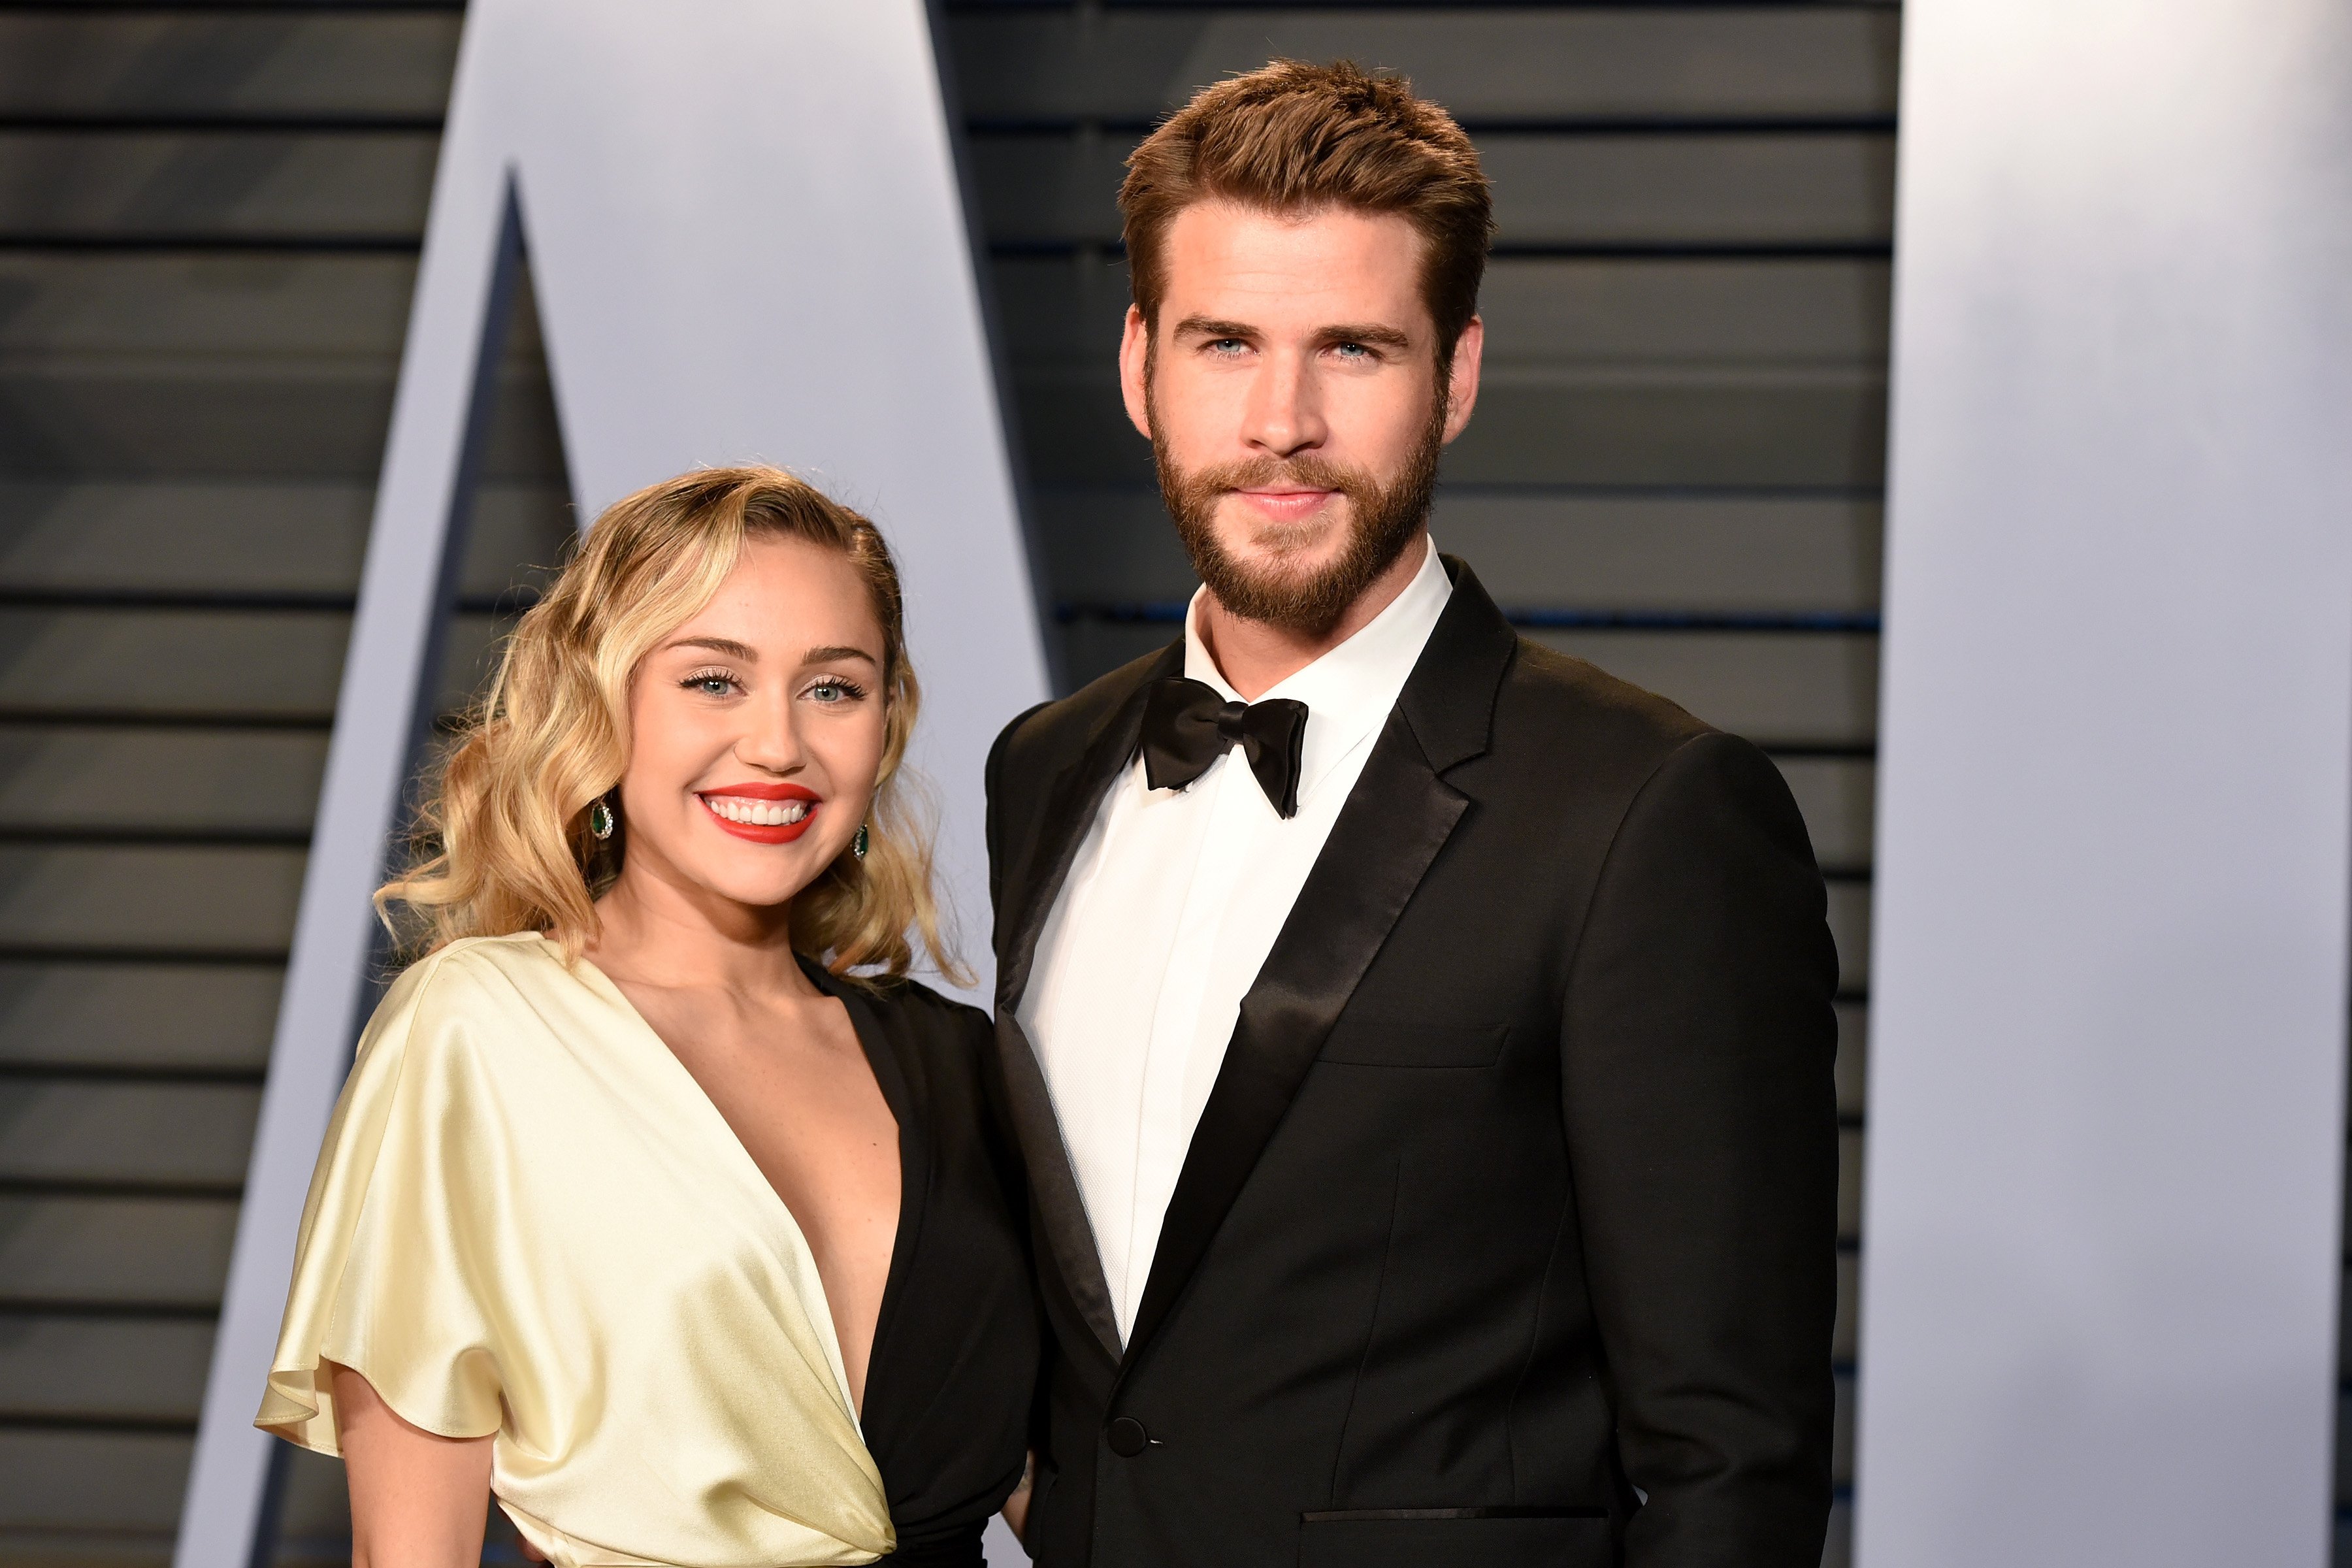 Miley Cyrus Talks About Sex With Liam Hemsworth Amid Reports of Her Breakup With Cody Simpson